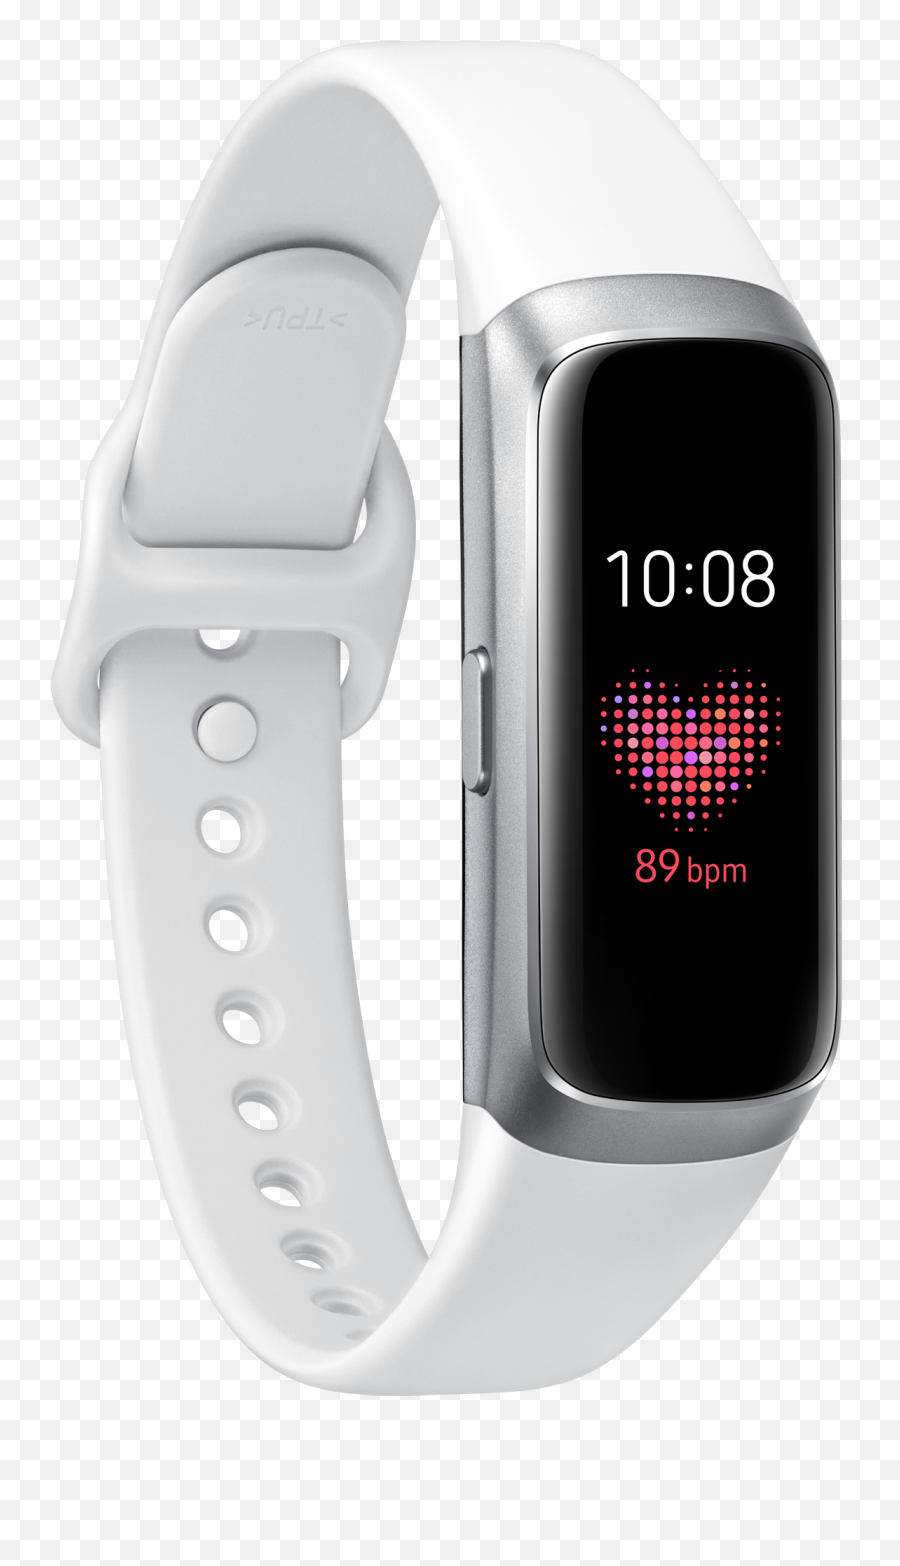 Galaxy Fit Samsung Support Uk - Samsung Galaxy Fit Silver Png,Icon Health And Fitness Manuals